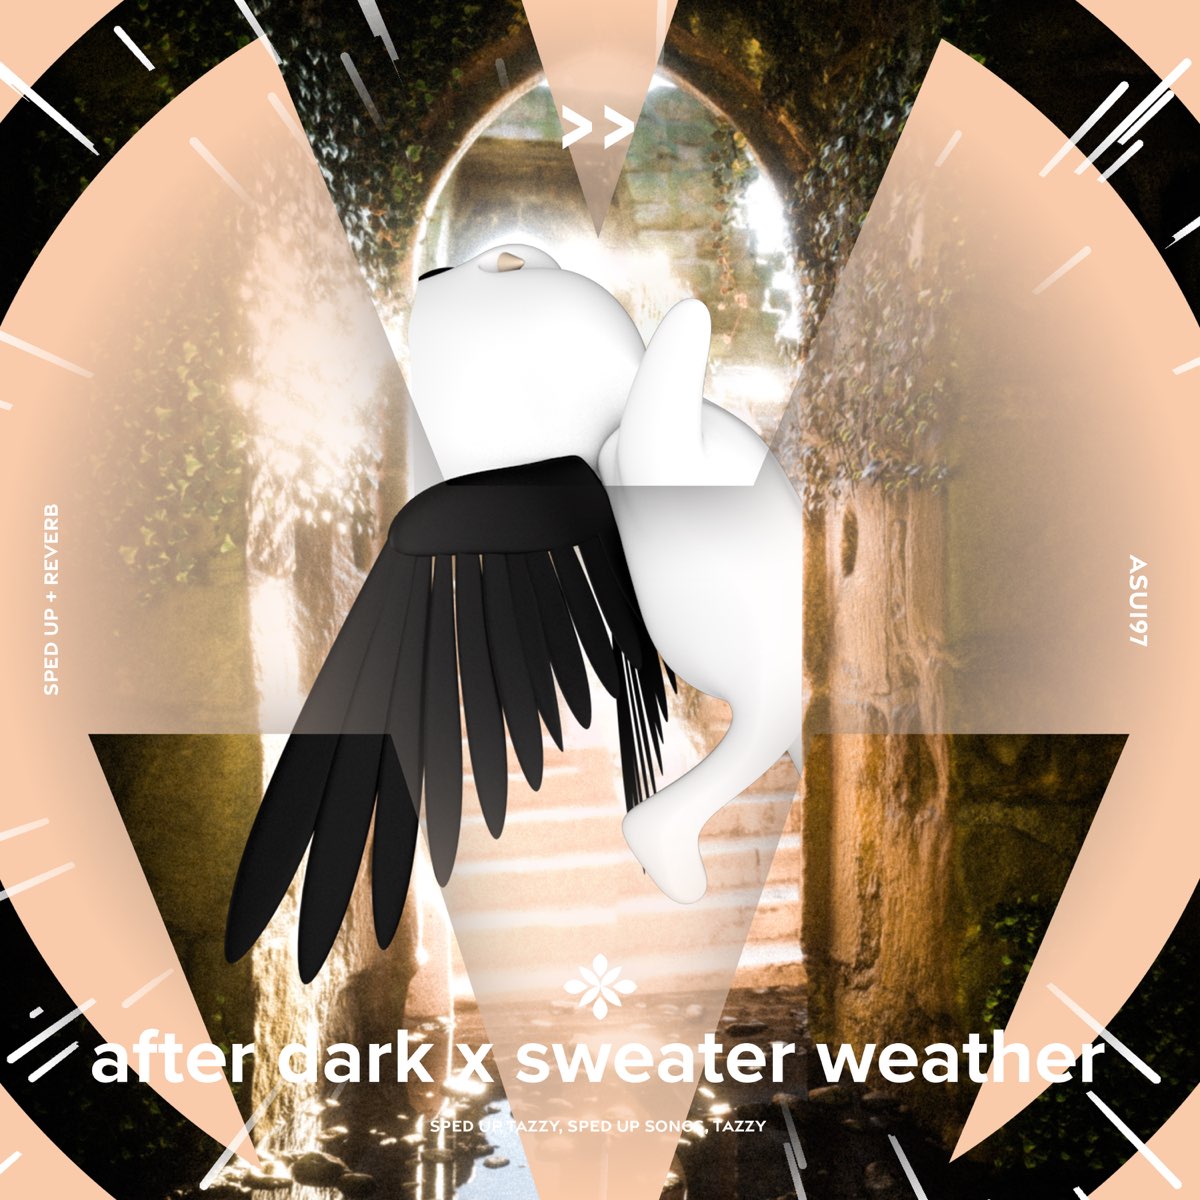 After dark x weather speed. After Dark x Sweater. After Dark x Sweater weather. After Dark x Sweater weather музыка. After Dark x Sweater weather (Sped up to perfection).